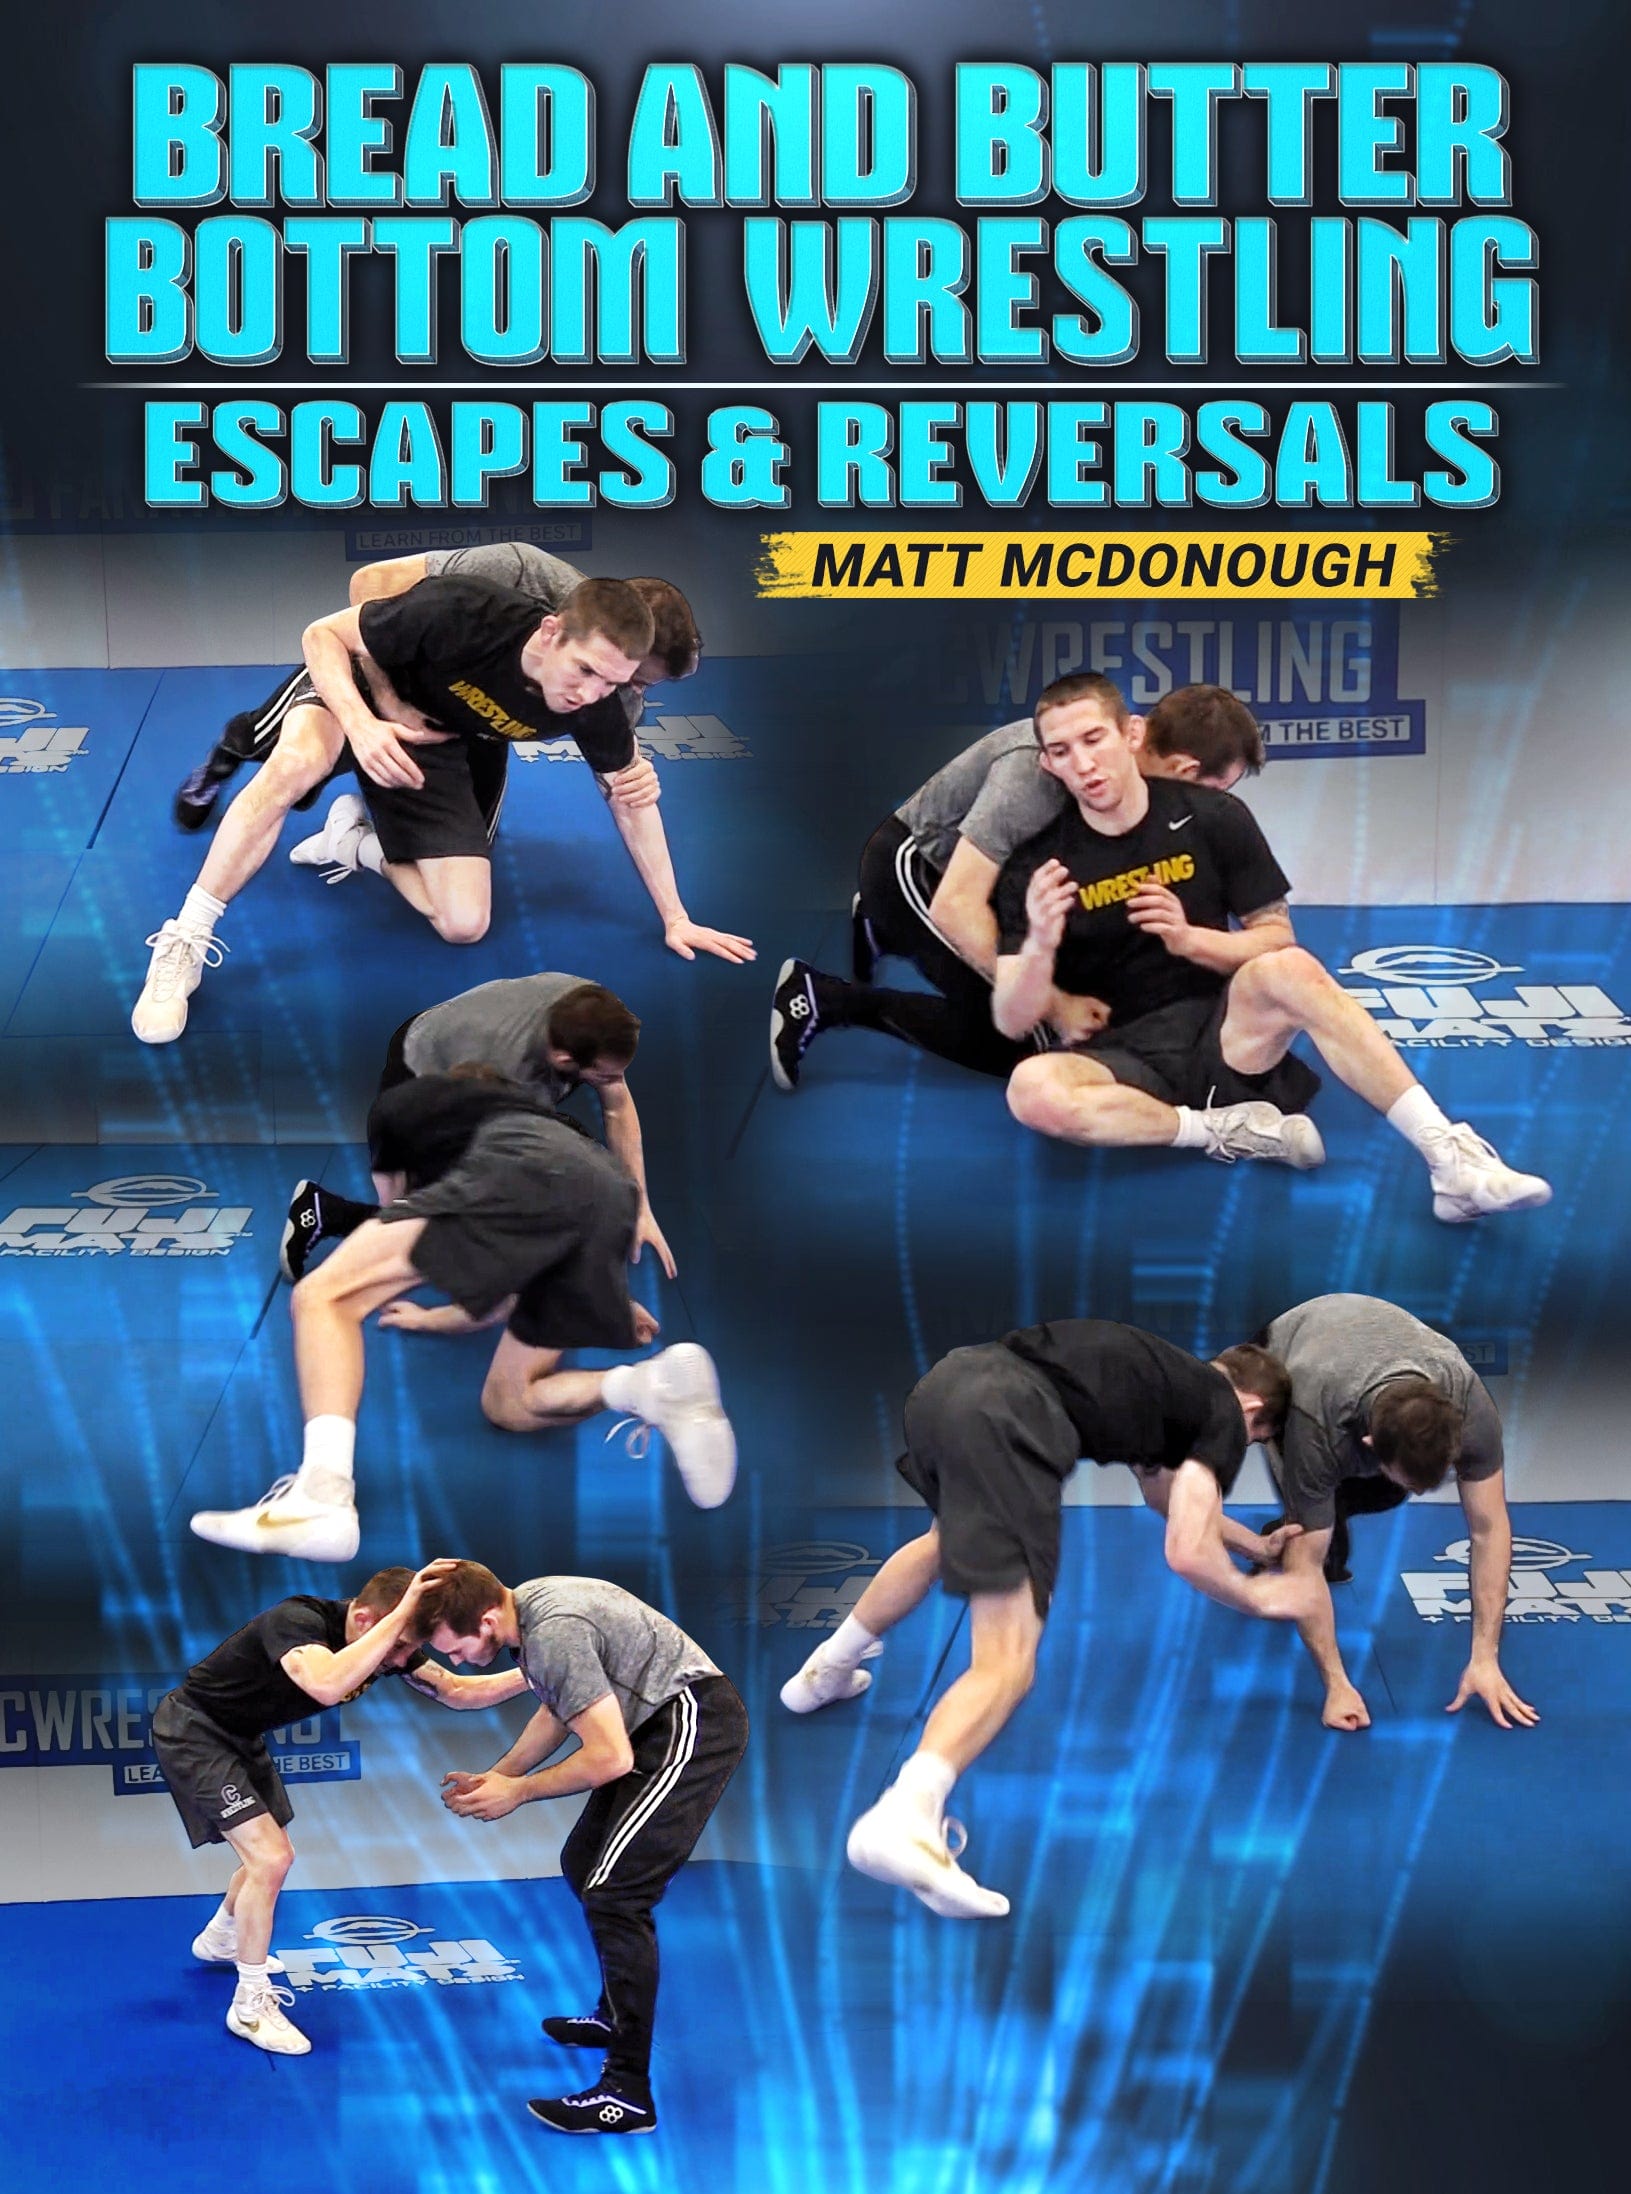 Bread and Butter Bottom Wrestling: Escapes & Reversals by Matt McDonough